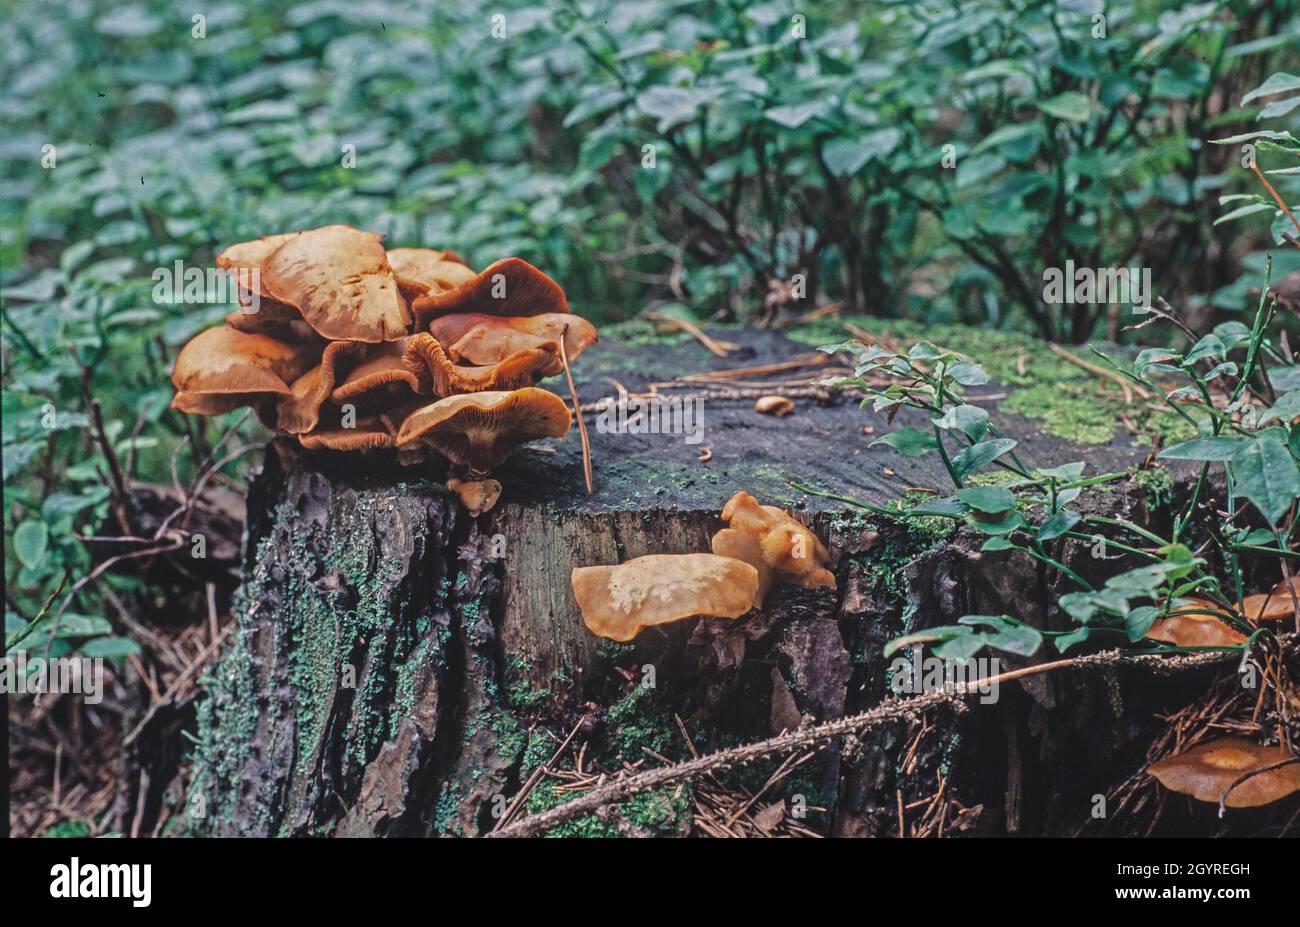 armillaria tabescens mushroom cluster in the forest Stock Photo